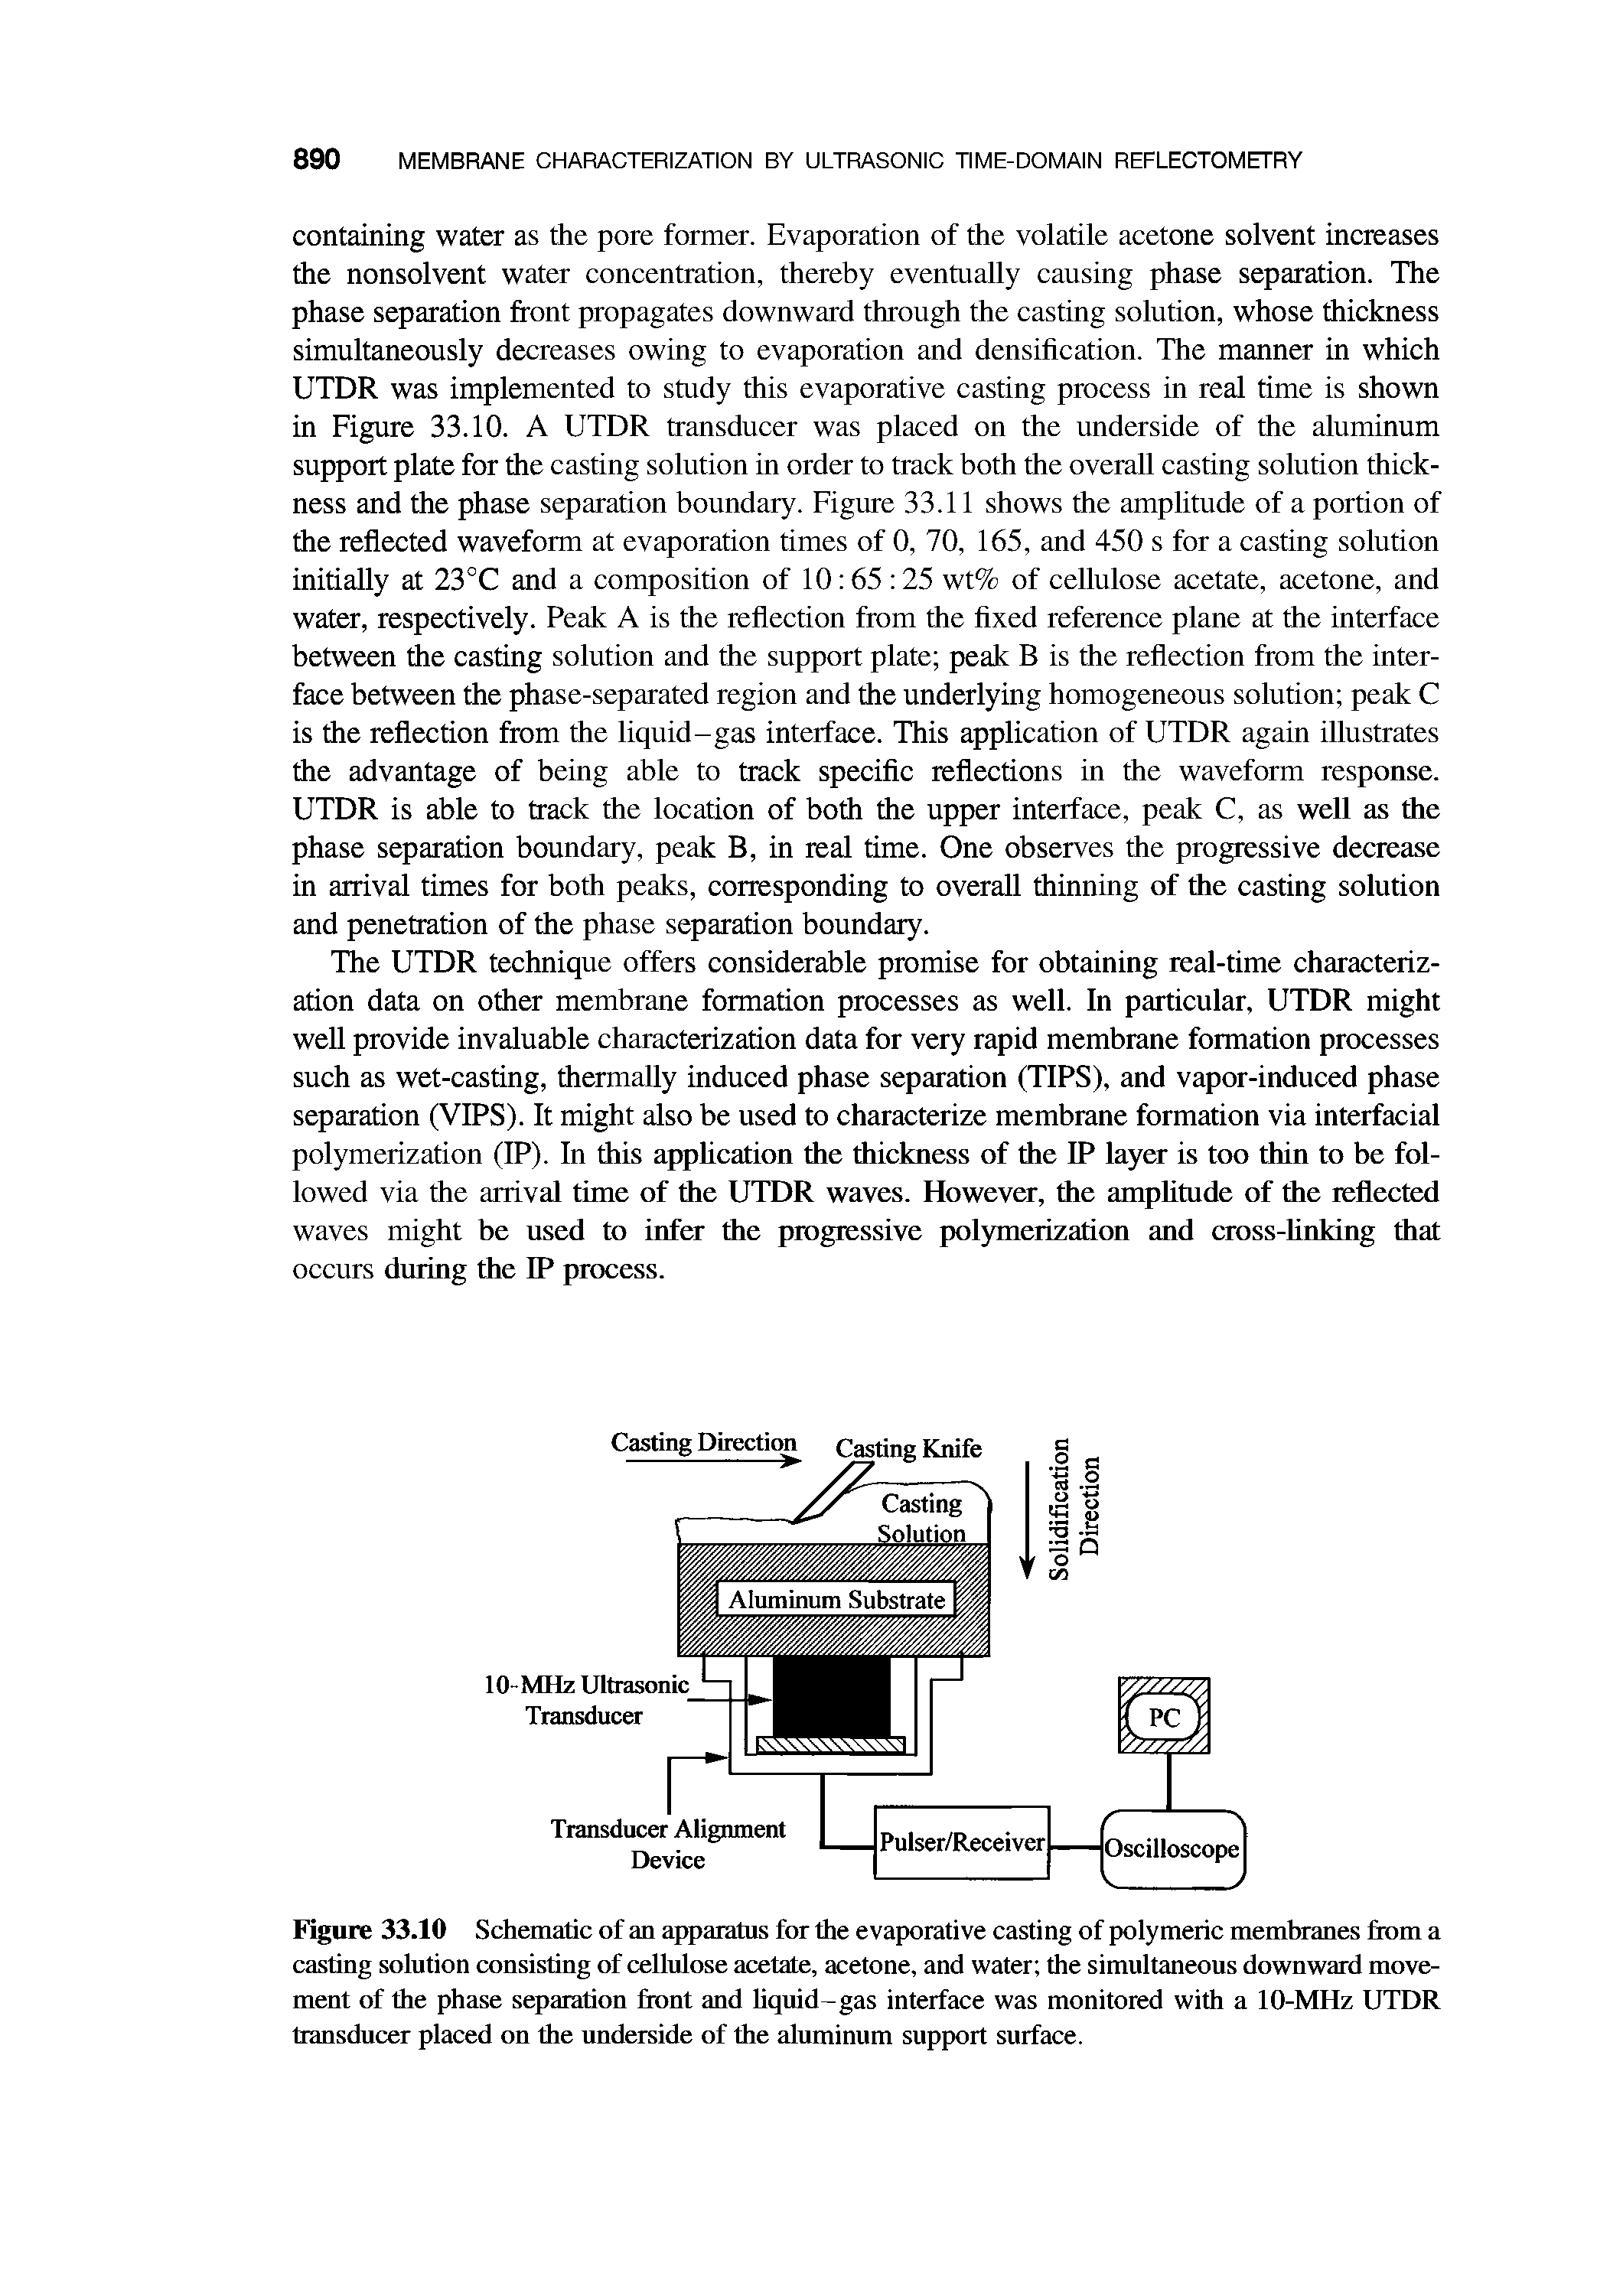 Figure 33.10 Schematic of an apparatus for the evaporative casting of polymeric membranes from a casting solution consisting of cellulose acetate, acetone, and water the simultaneous downward movement of the phase separation fiont and hquid-gas interface was monitored with a 10-MHz UTDR transducer placed on the underside of the aluminum support surface.